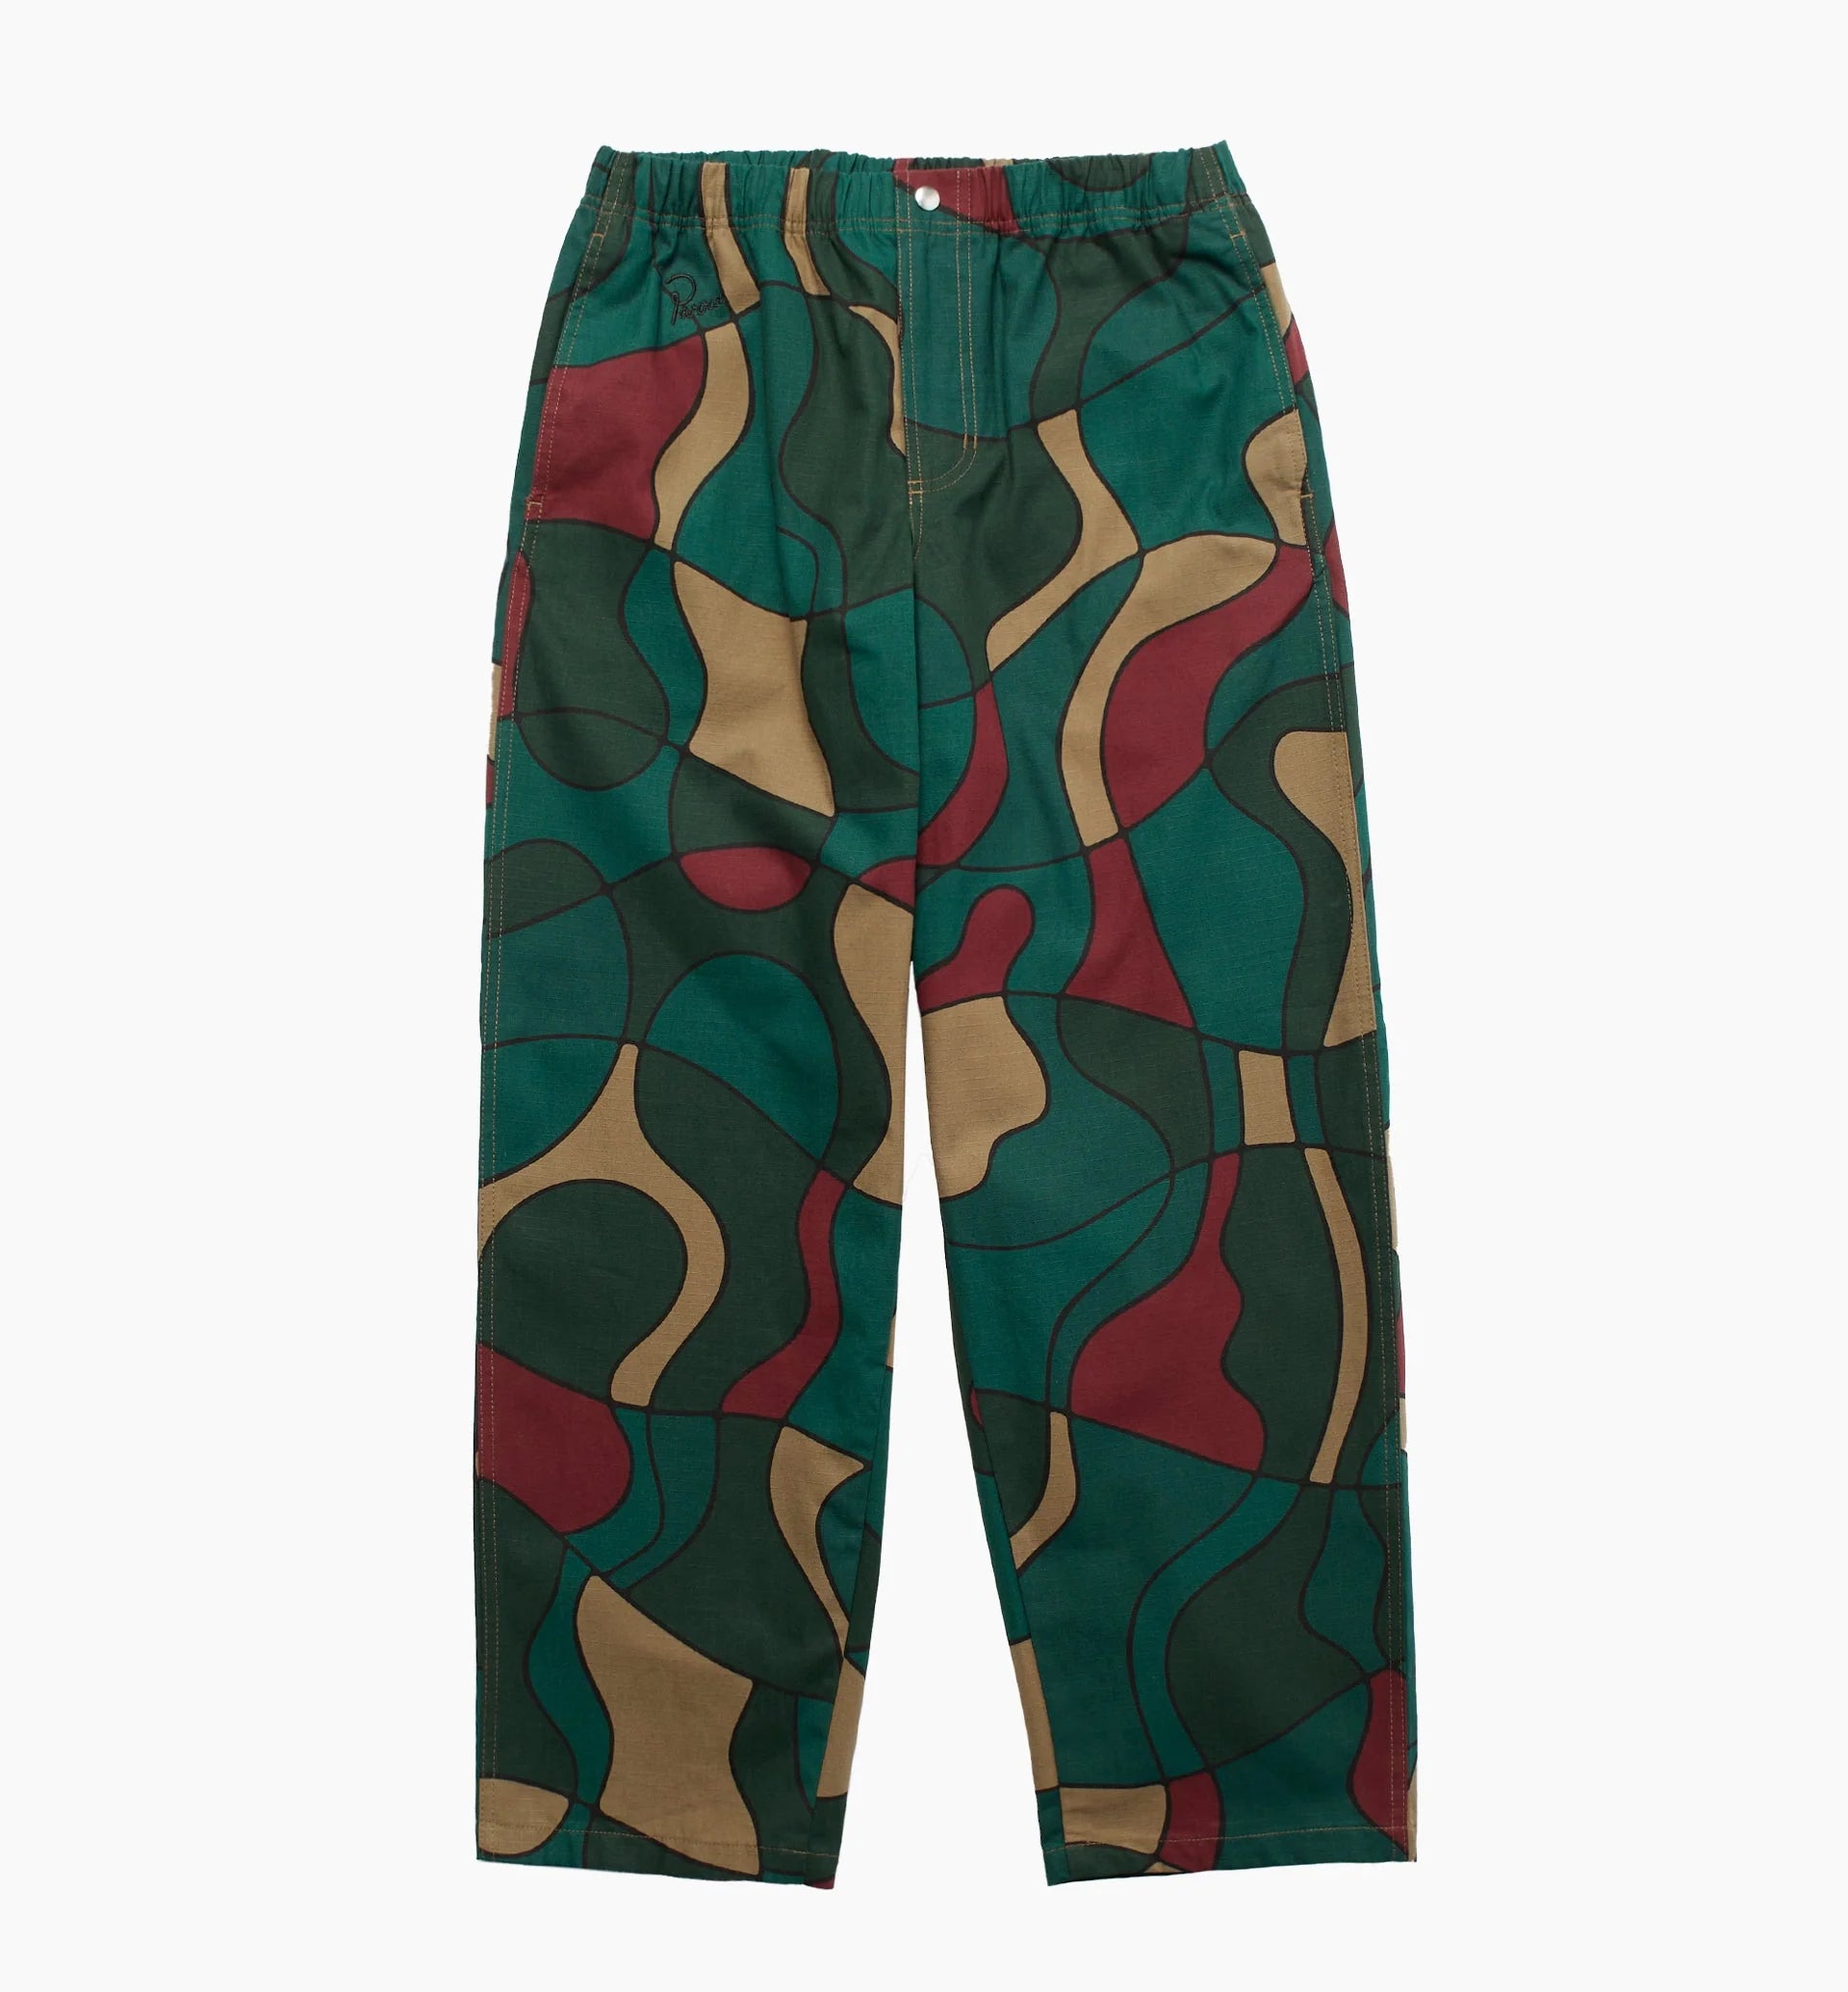 TREES IN WIND RELAXED PANTS - CAMO GREEN